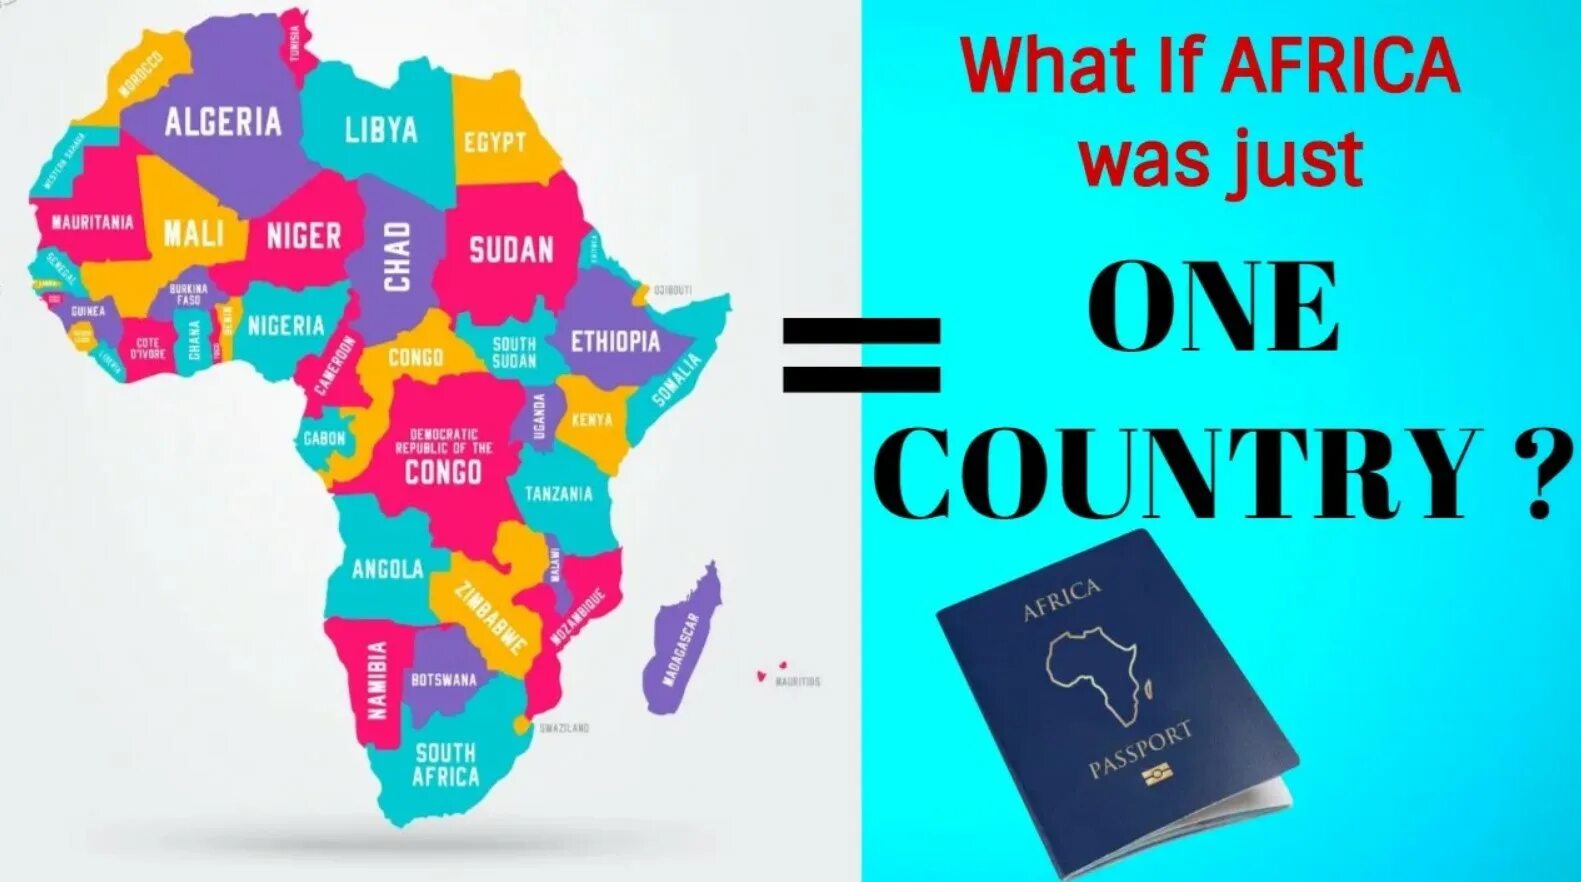 United States of Africa. ИФА Африка. Afrika States. What if South America and Africa. Have you been to africa